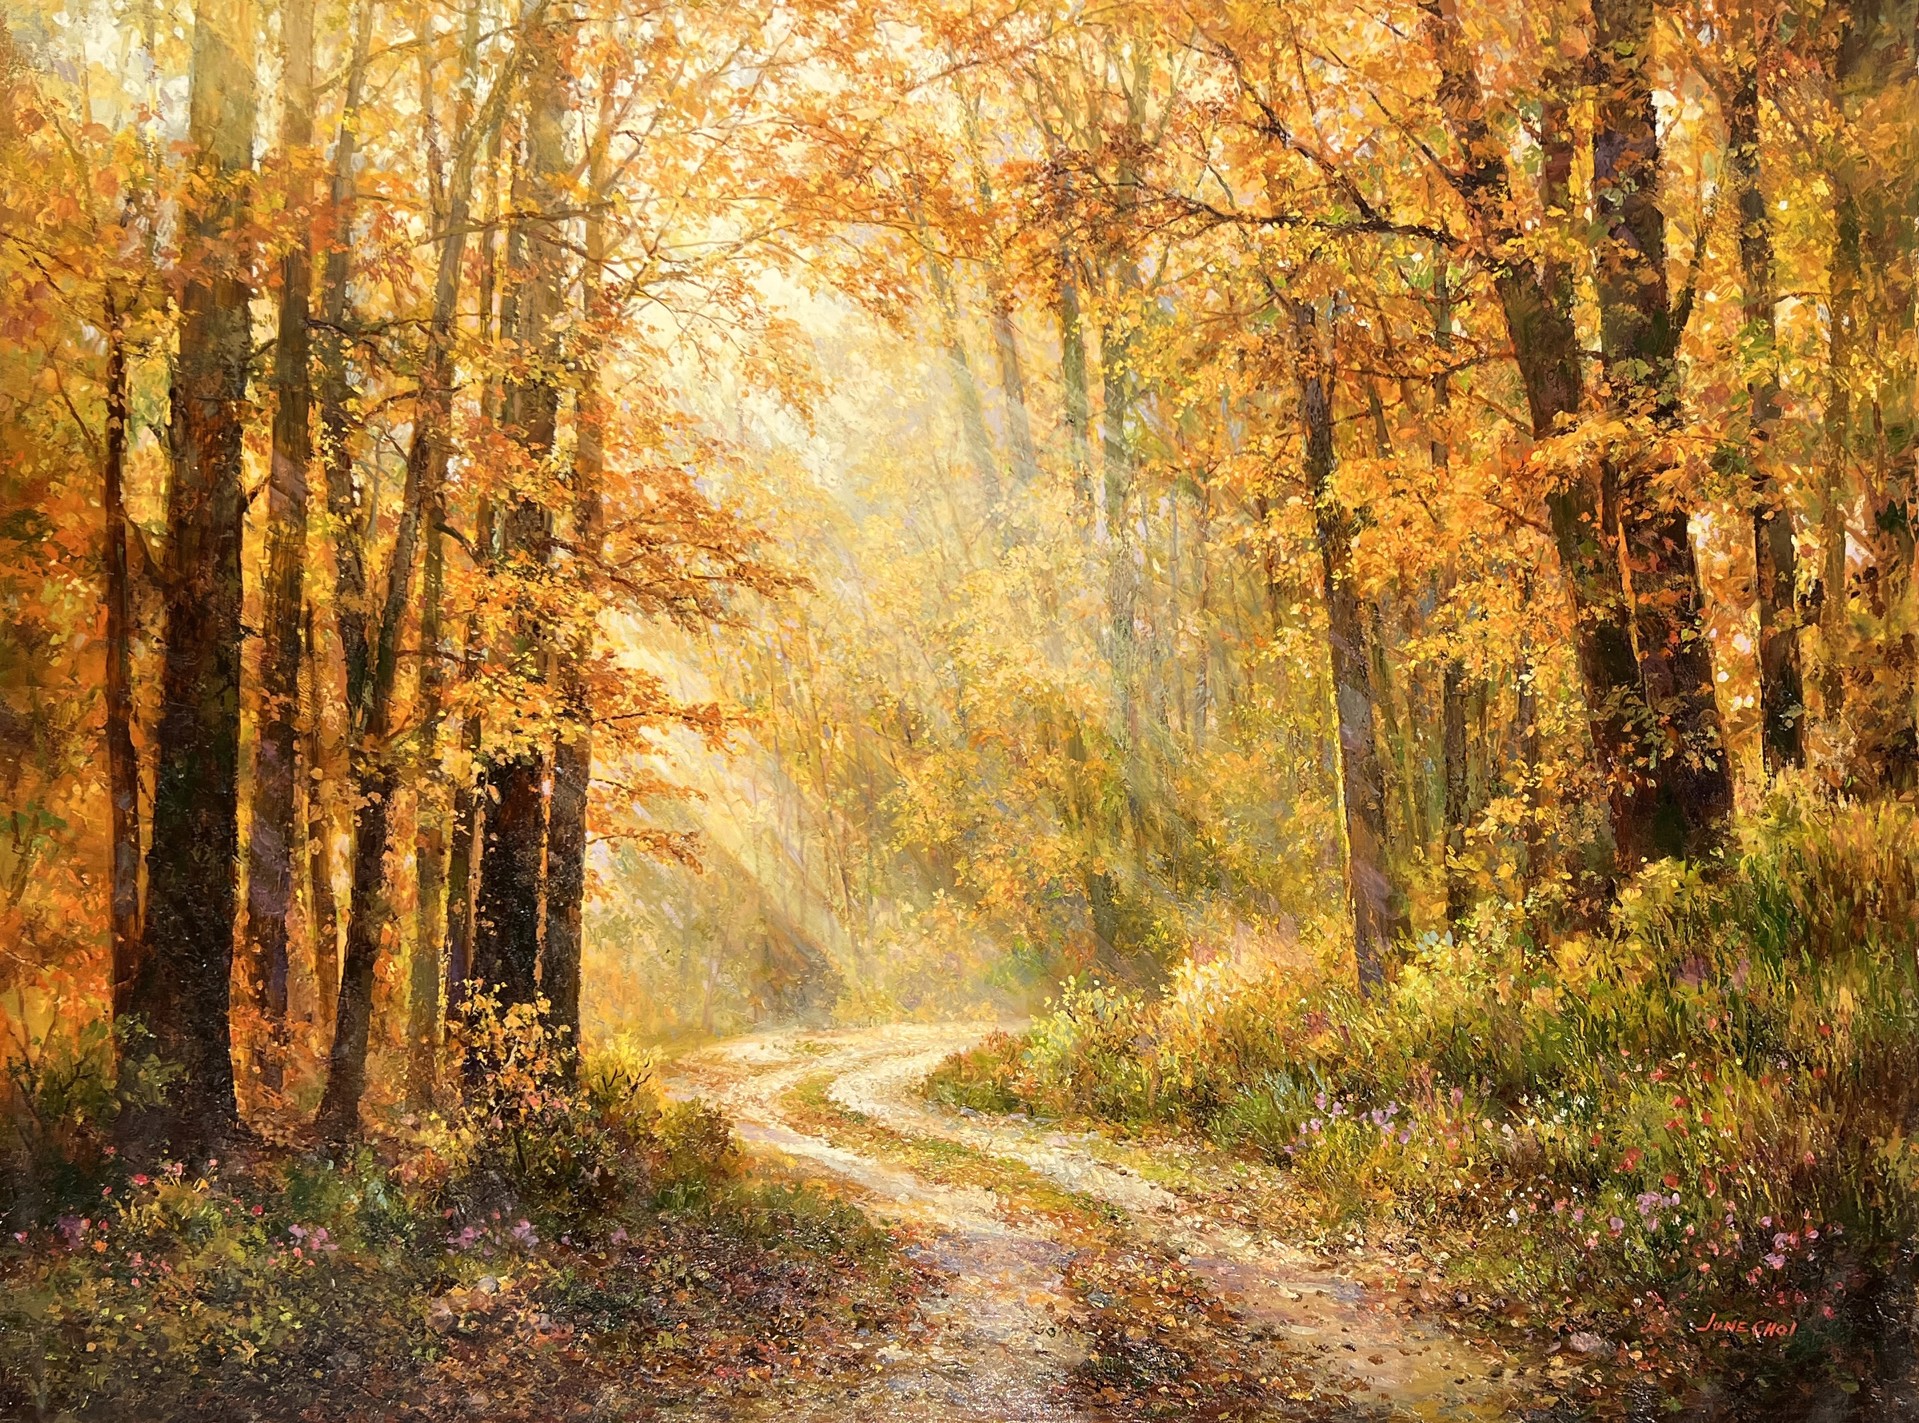 FOREST ROAD IN FALL by JUNE CHOI